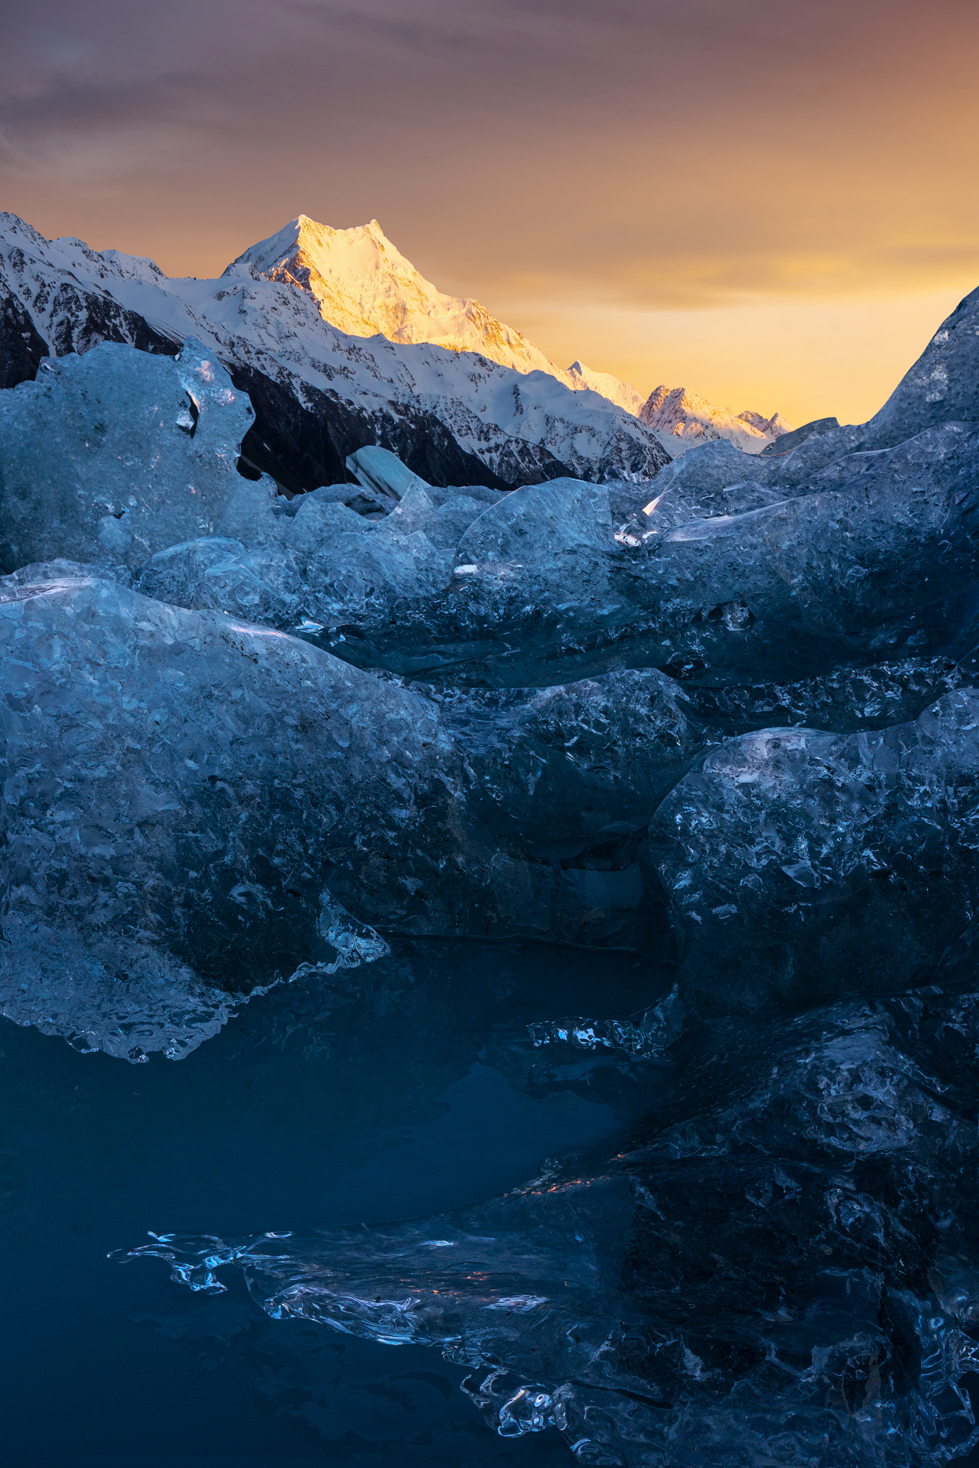 Sunrise, Mount Cook and ice from the Tasman glacier